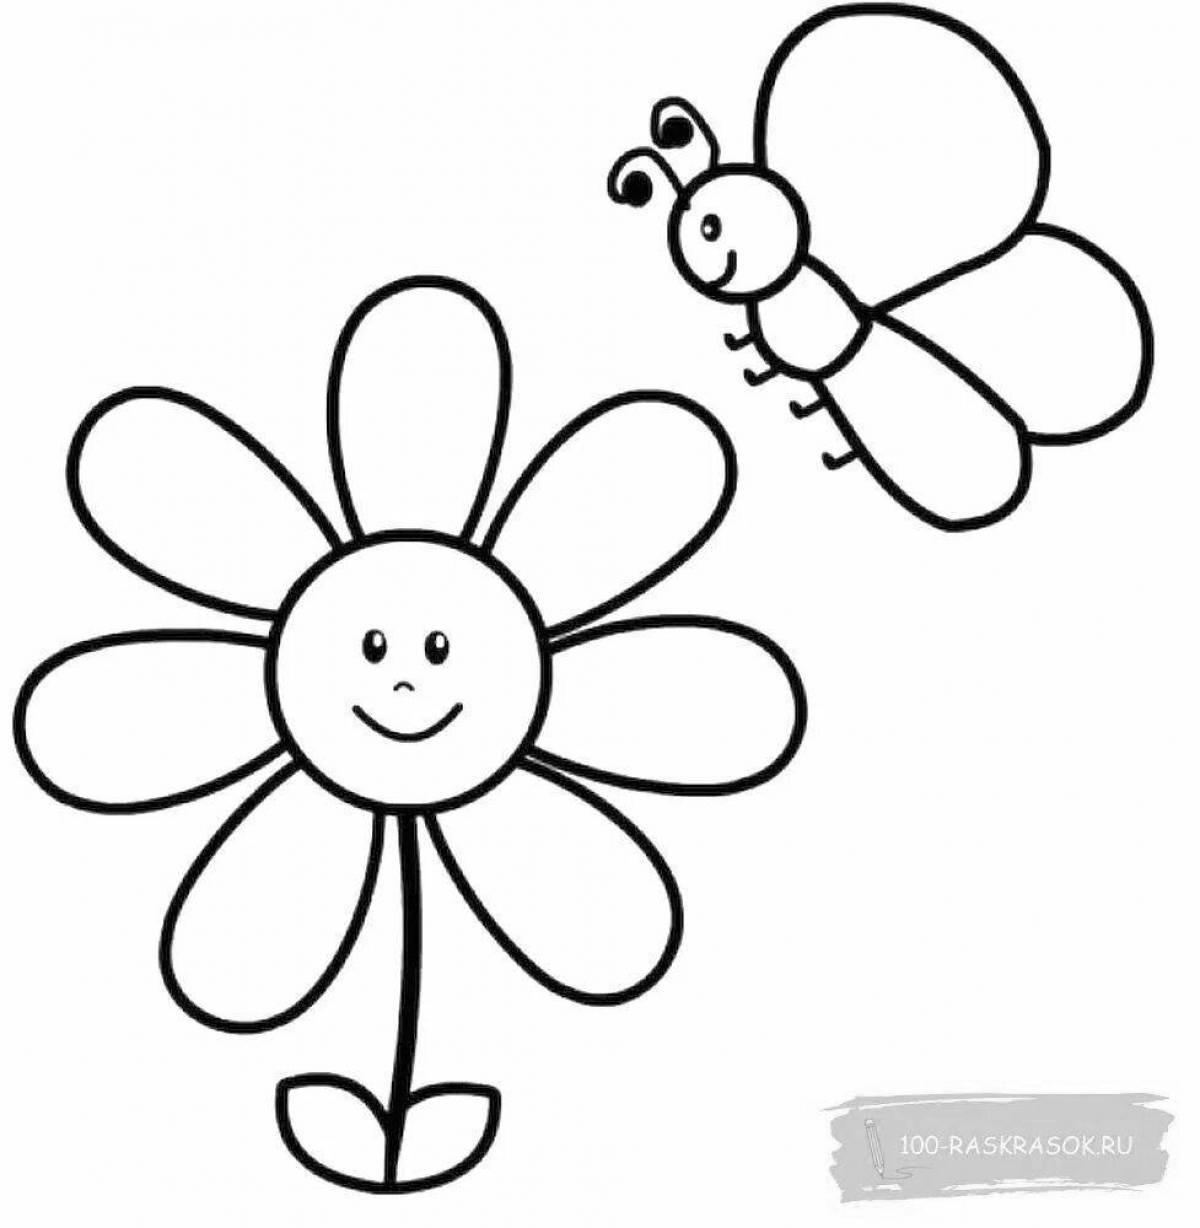 Sweet coloring flower for children 2-3 years old